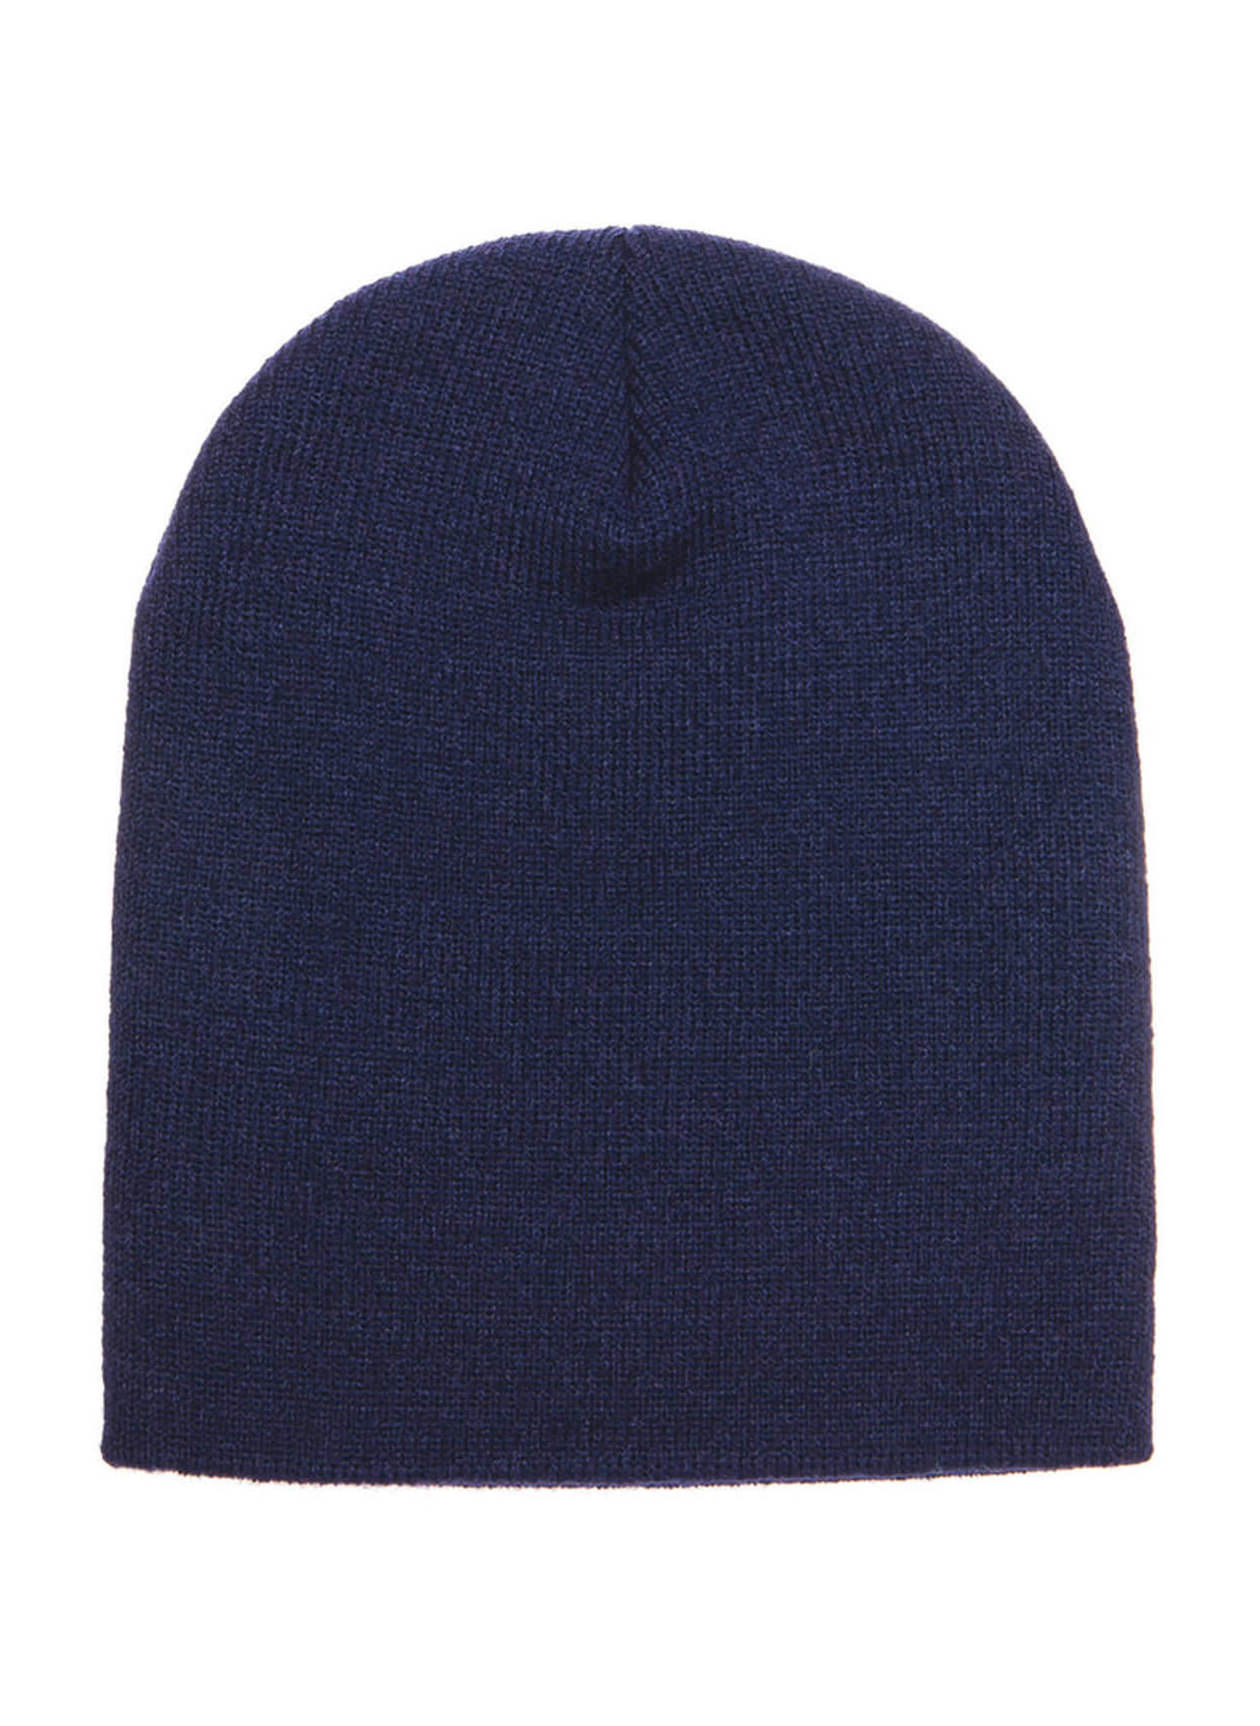 Yupoong Navy Knit Beanie